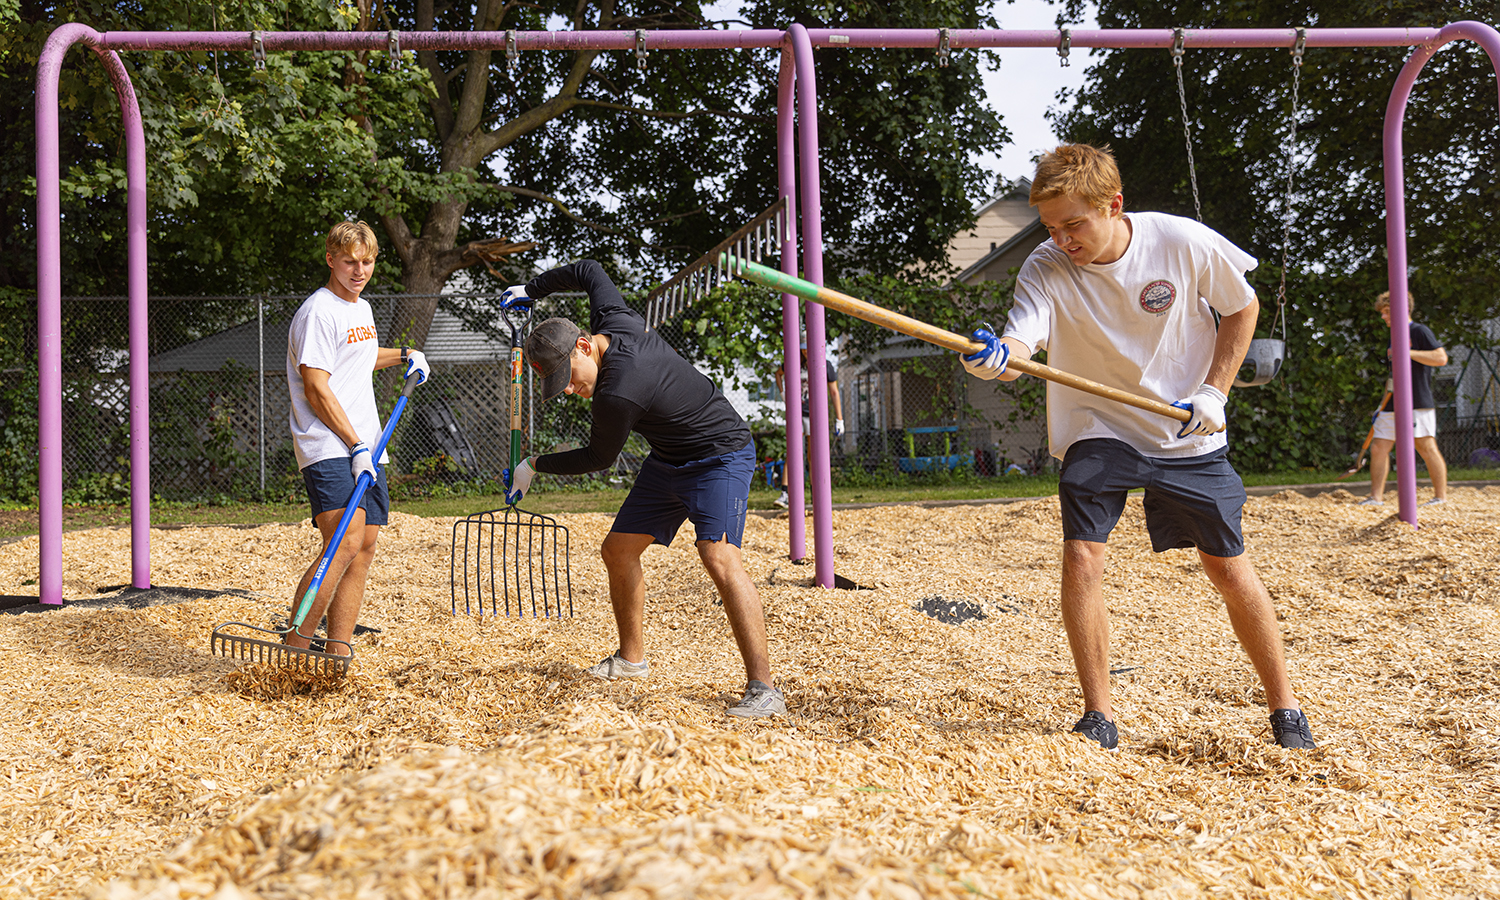 Students spread wood chips at Richards Park playground during community service activities.